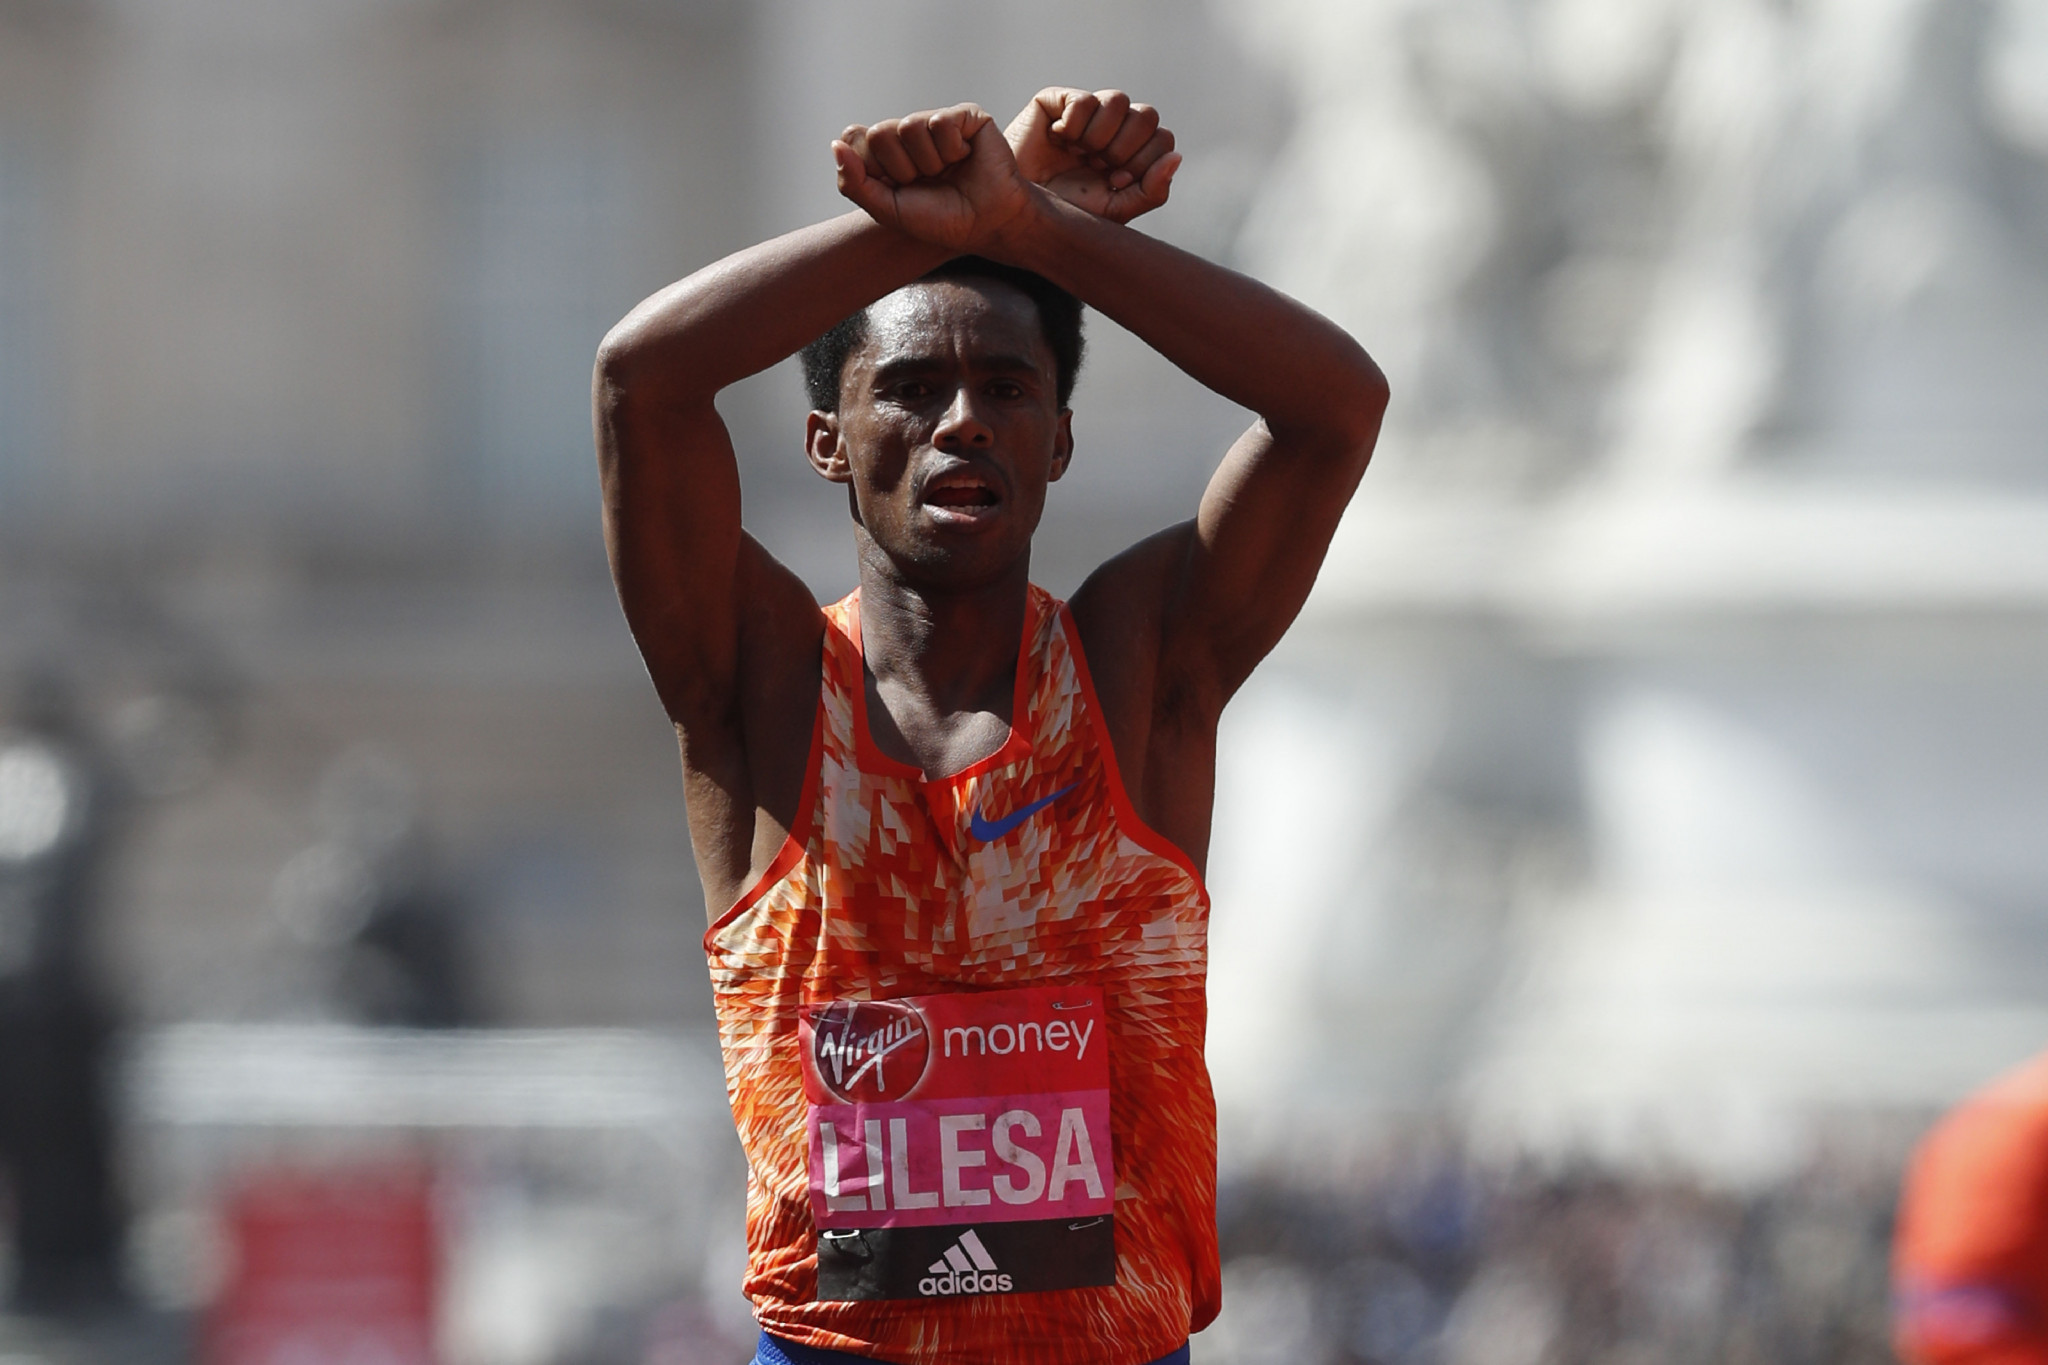 Feyisa Lilesa made an anti-Government gesture after winning silver in Rio ©Getty Images